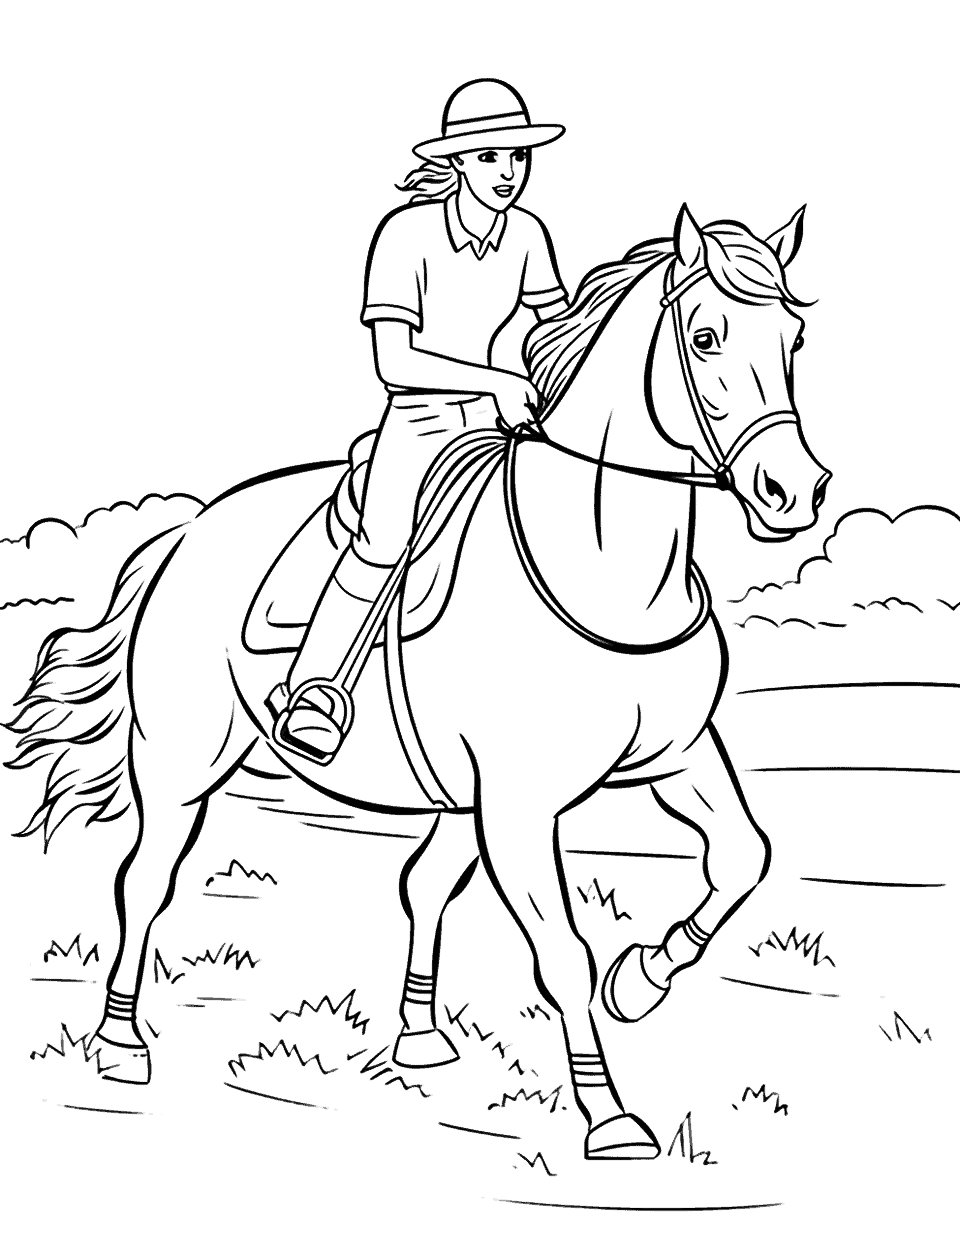 Barrel Racing Action Coloring Page - An exciting scene from a barrel racing competition with a rider skillfully guiding her horse.